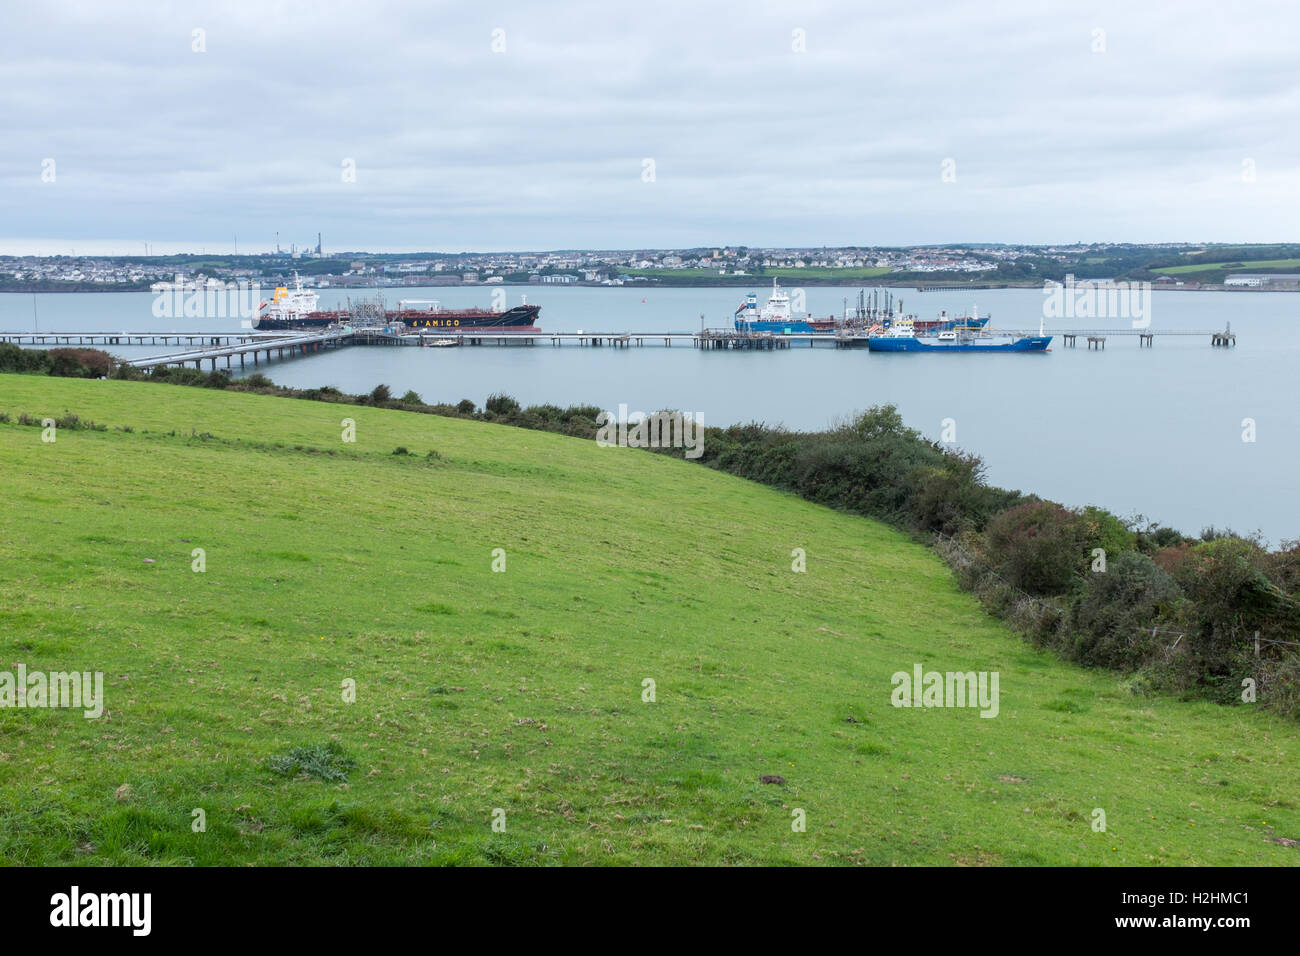 Oil tankers docked at Milford Haven, Pembrokeshire, Wales Stock Photo